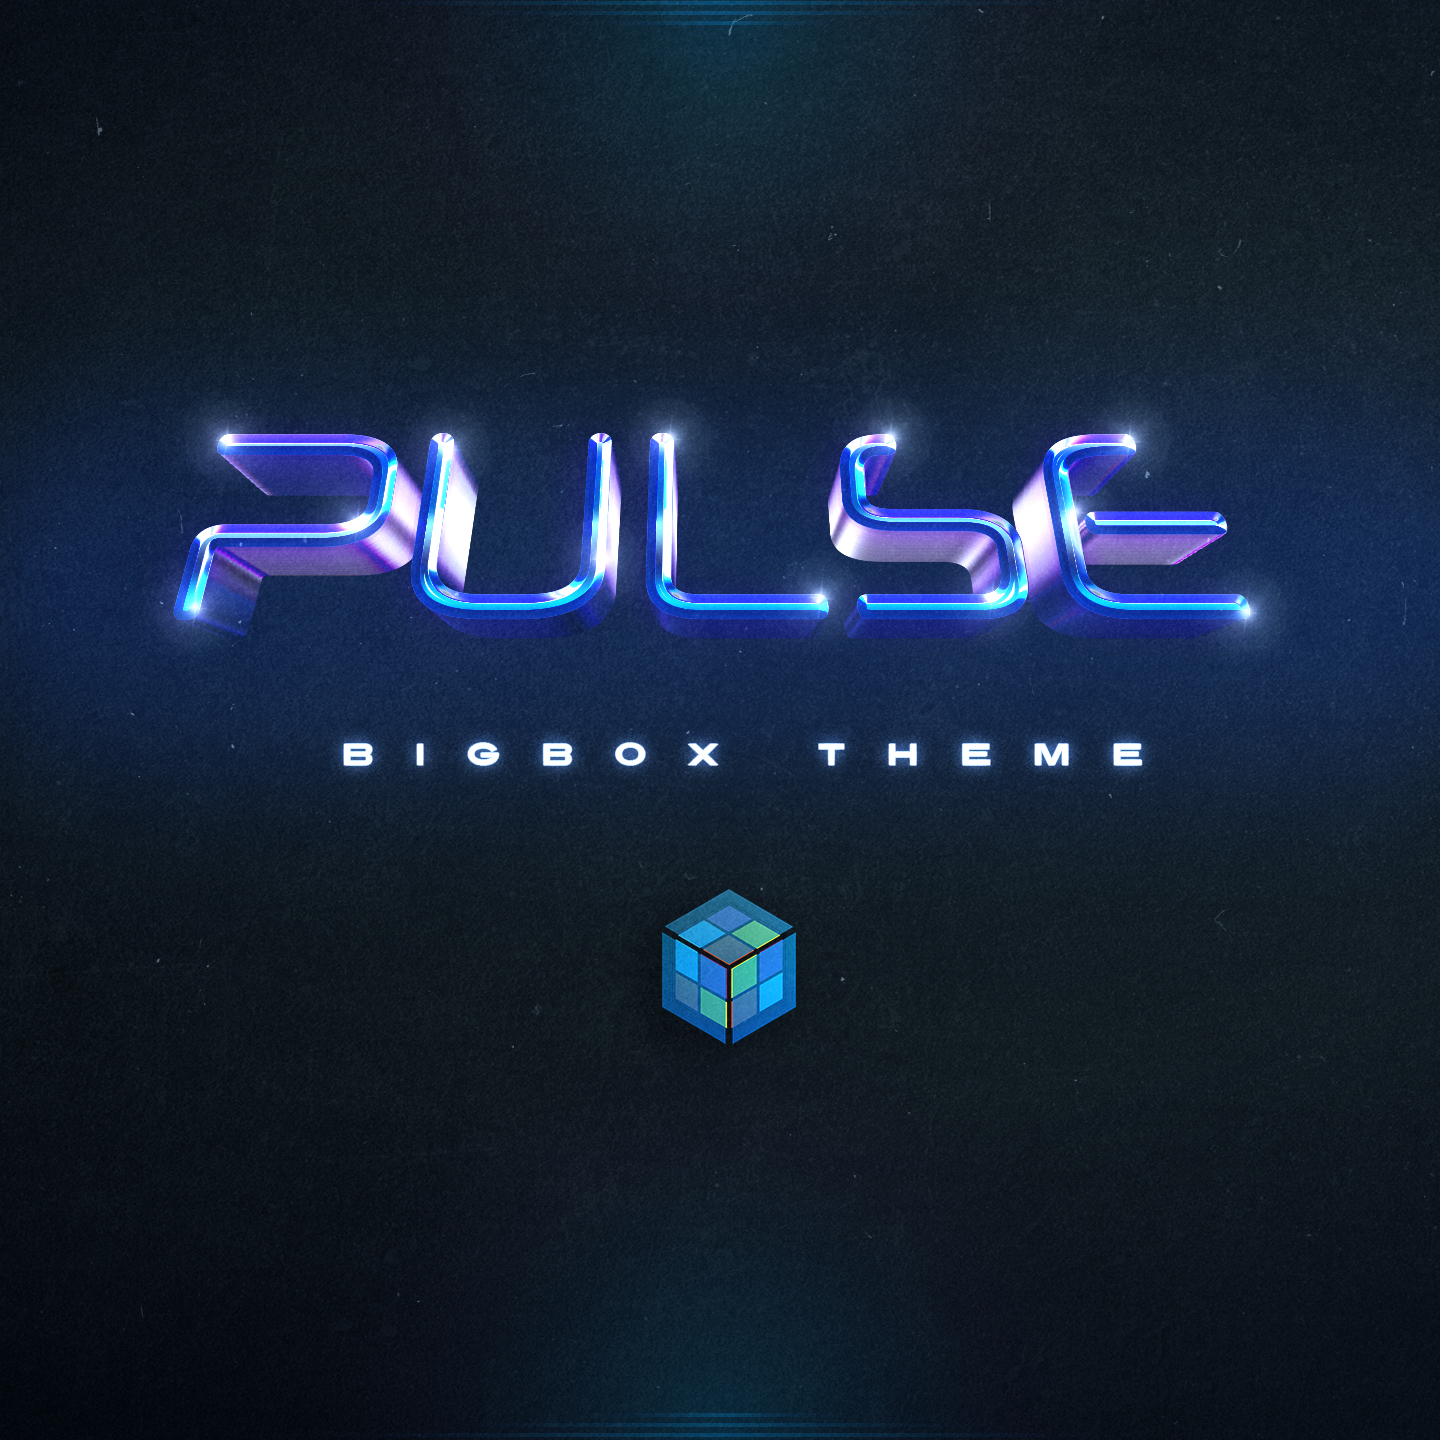 More information about "Pulse"